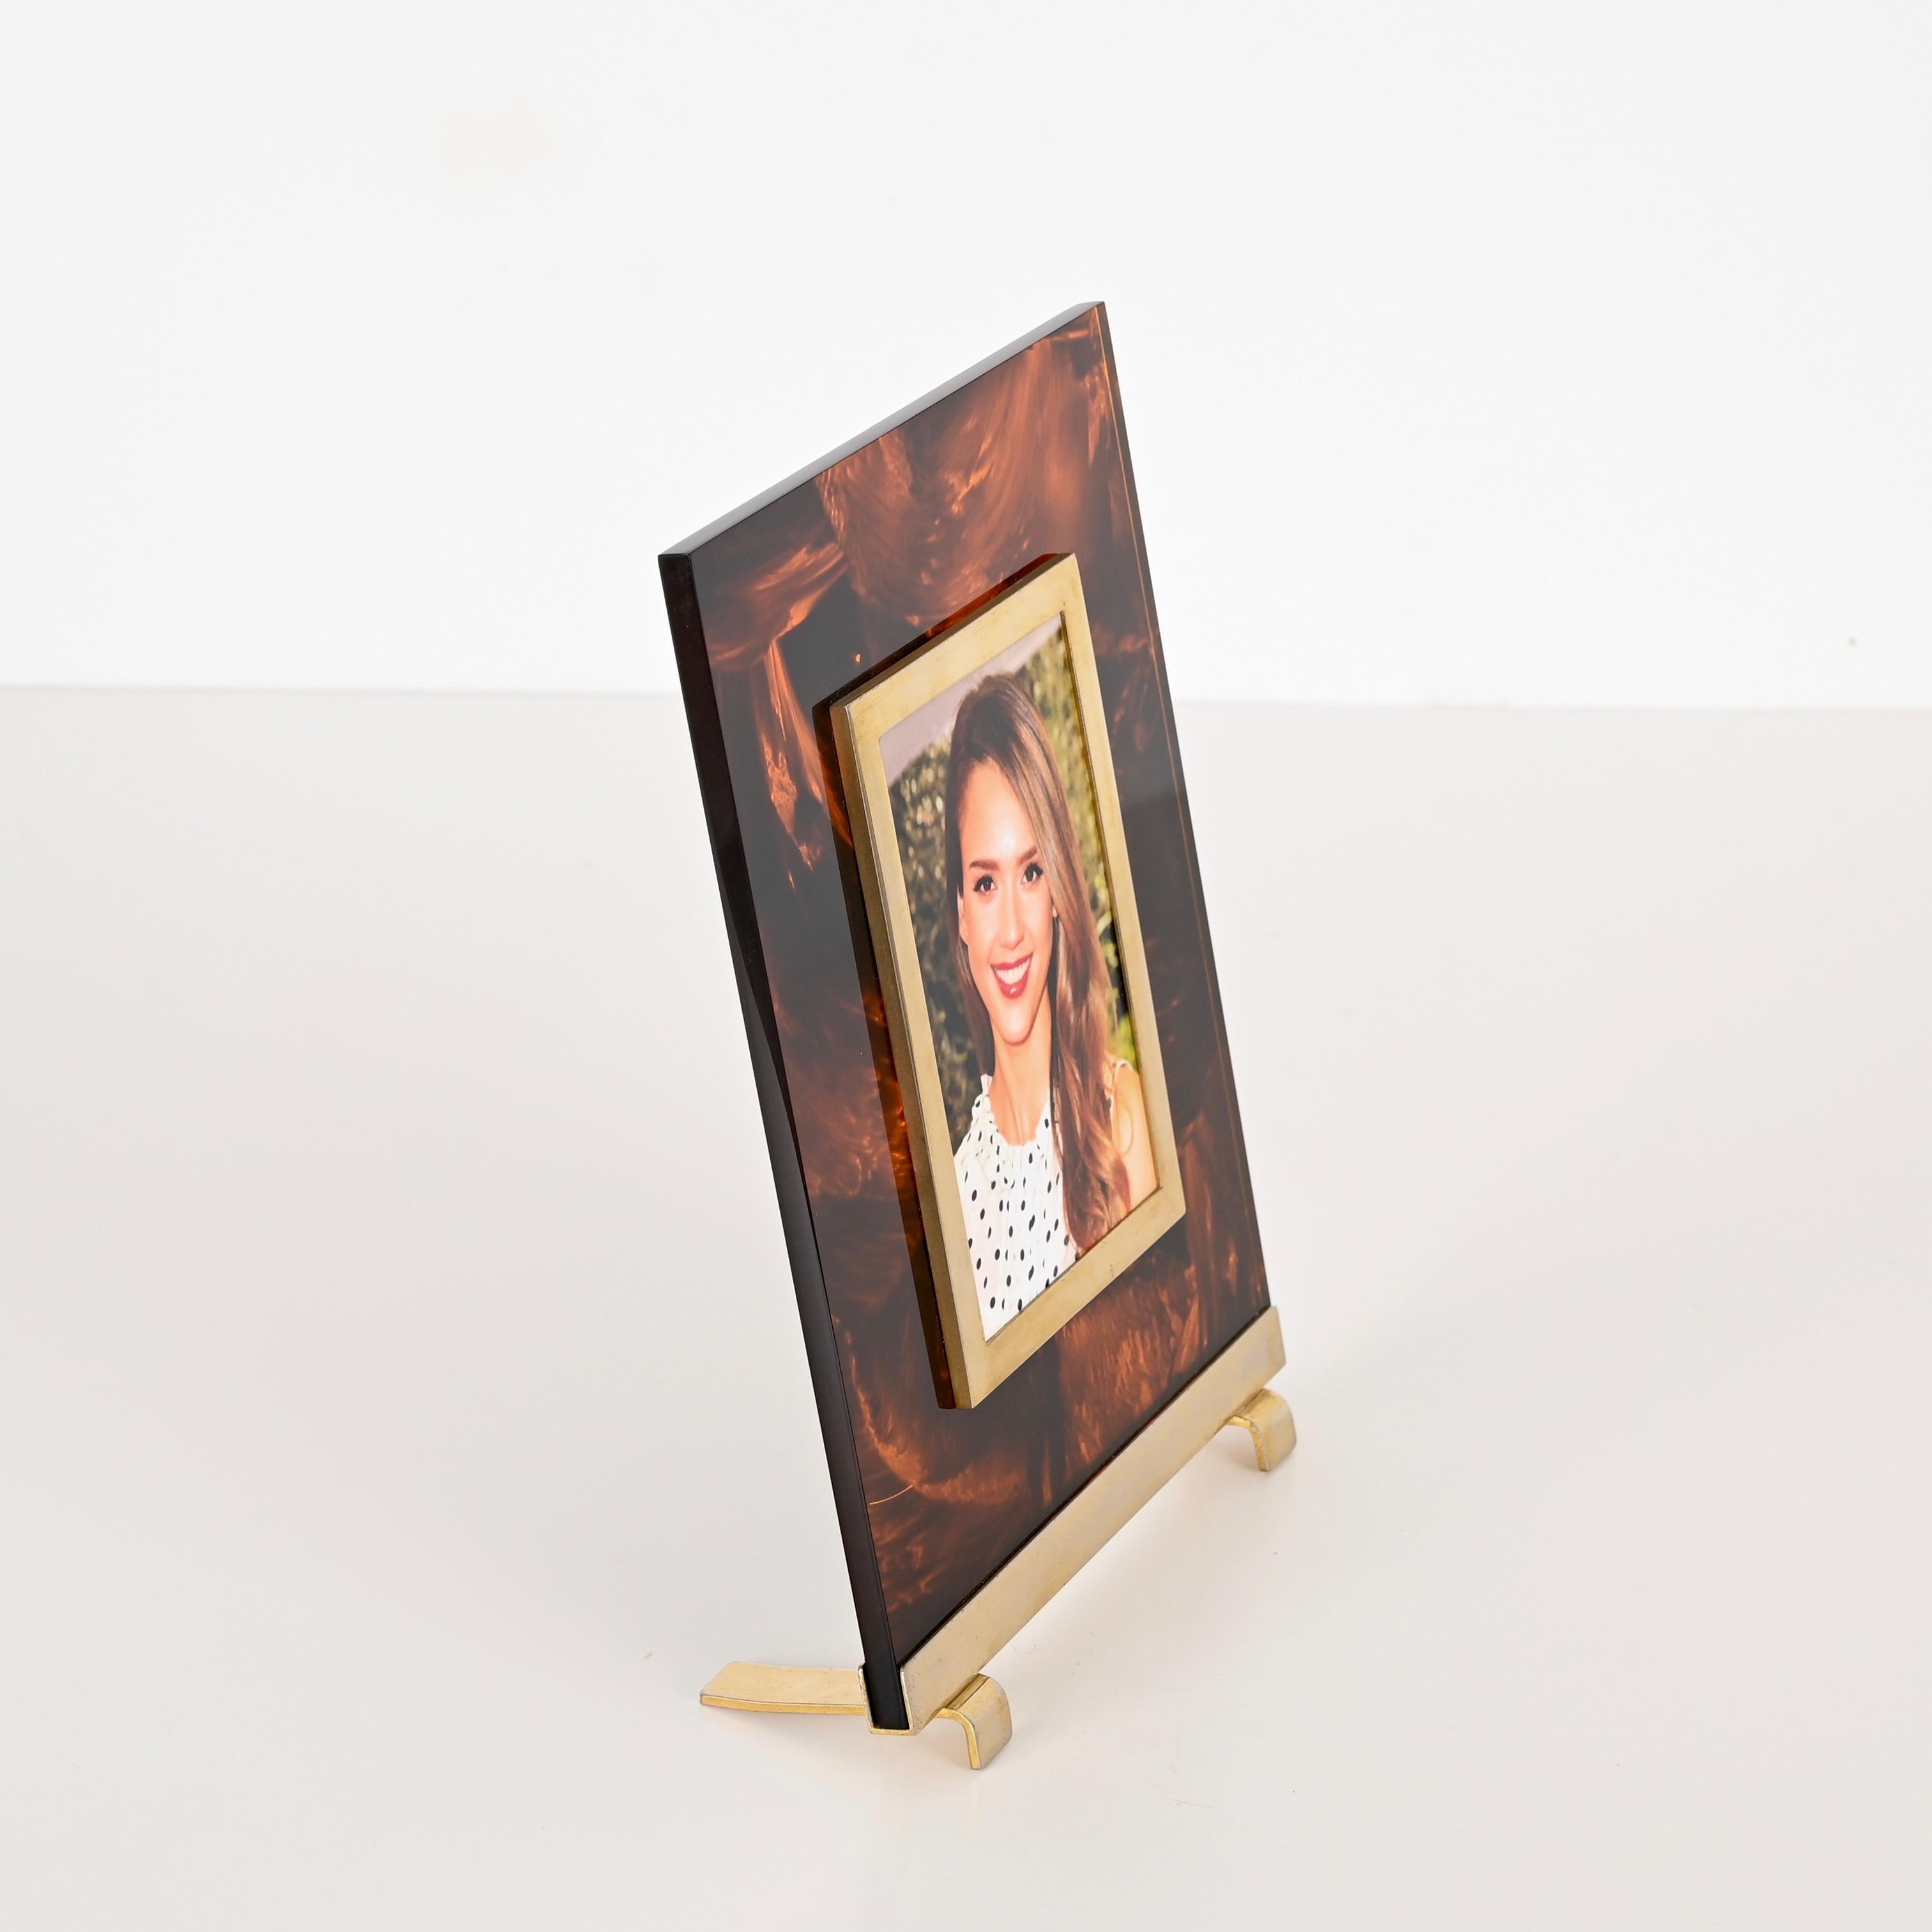 Hand-Crafted Photo Frame in Lucite Tortoiseshell and Brass, Christian Dior, Italy, 1970s For Sale